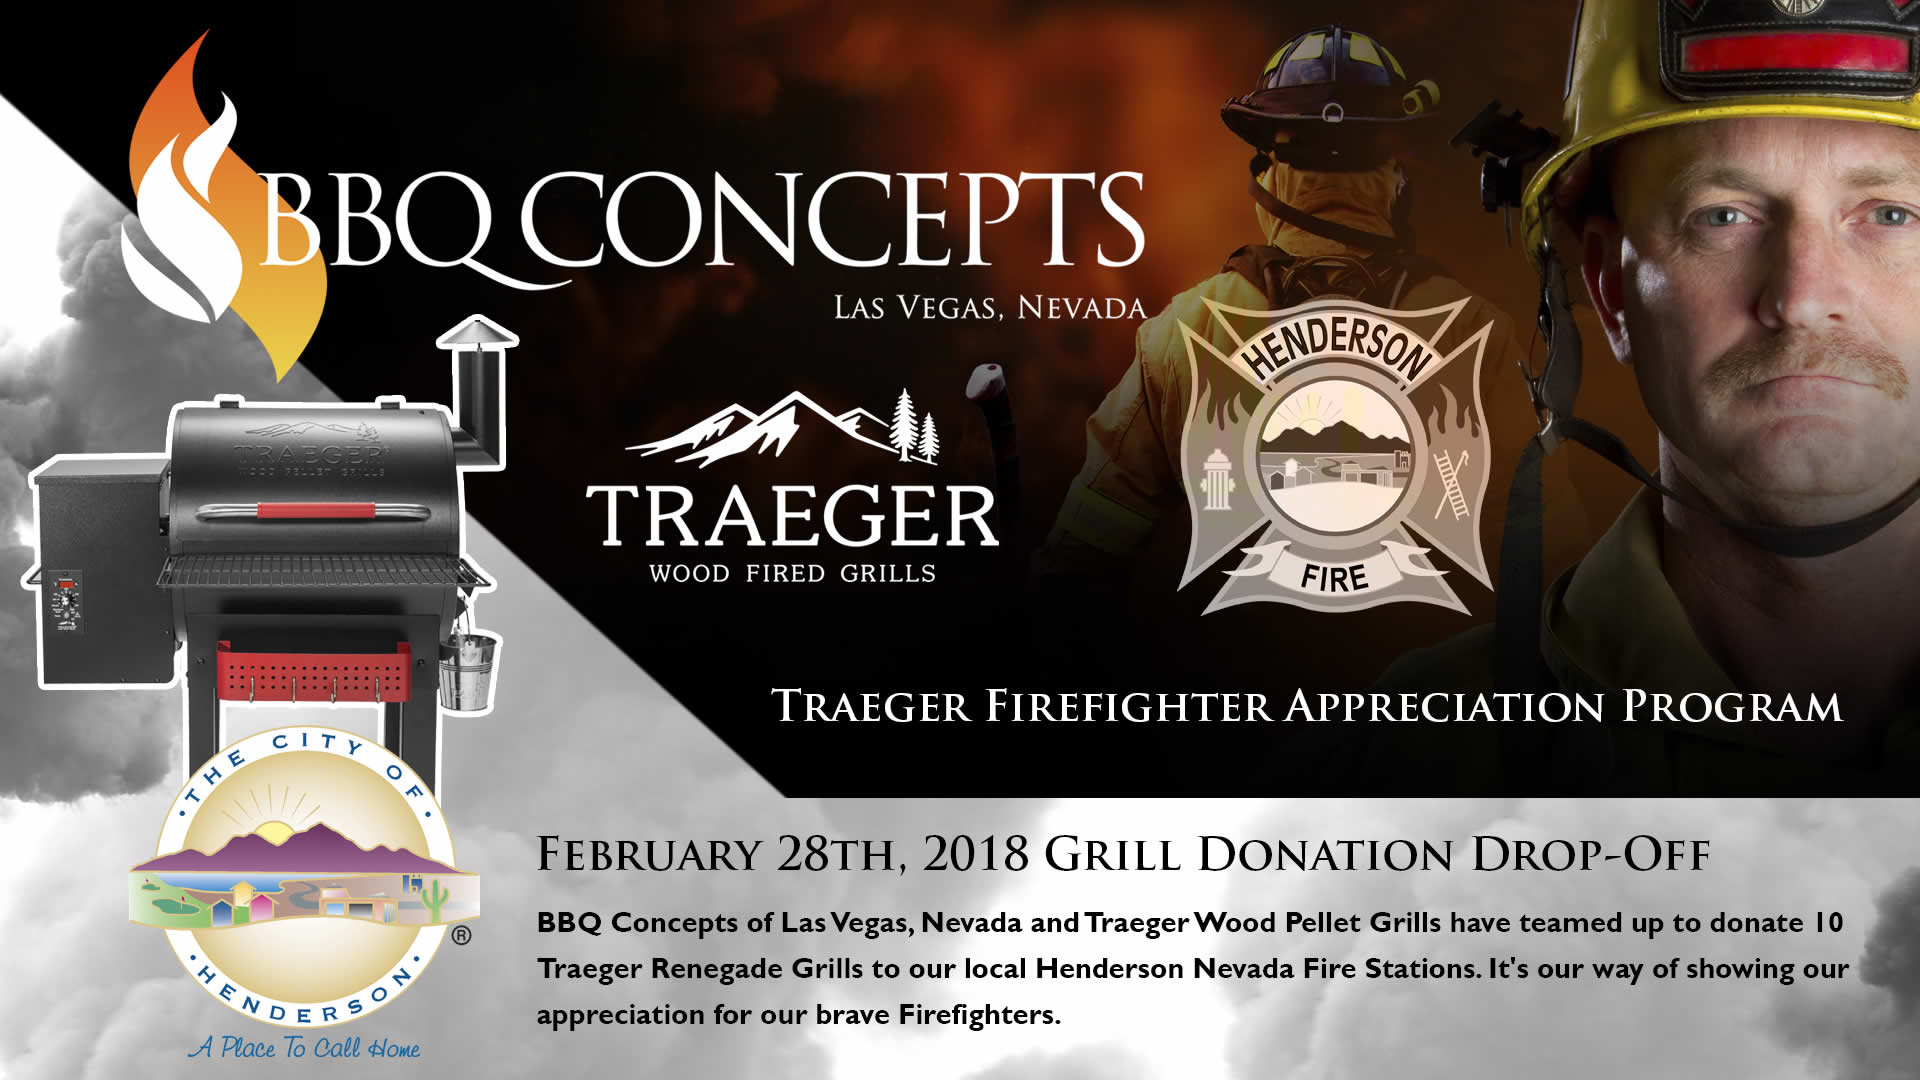 Traeger Firefighter Appreciation Program by BBQ Concepts